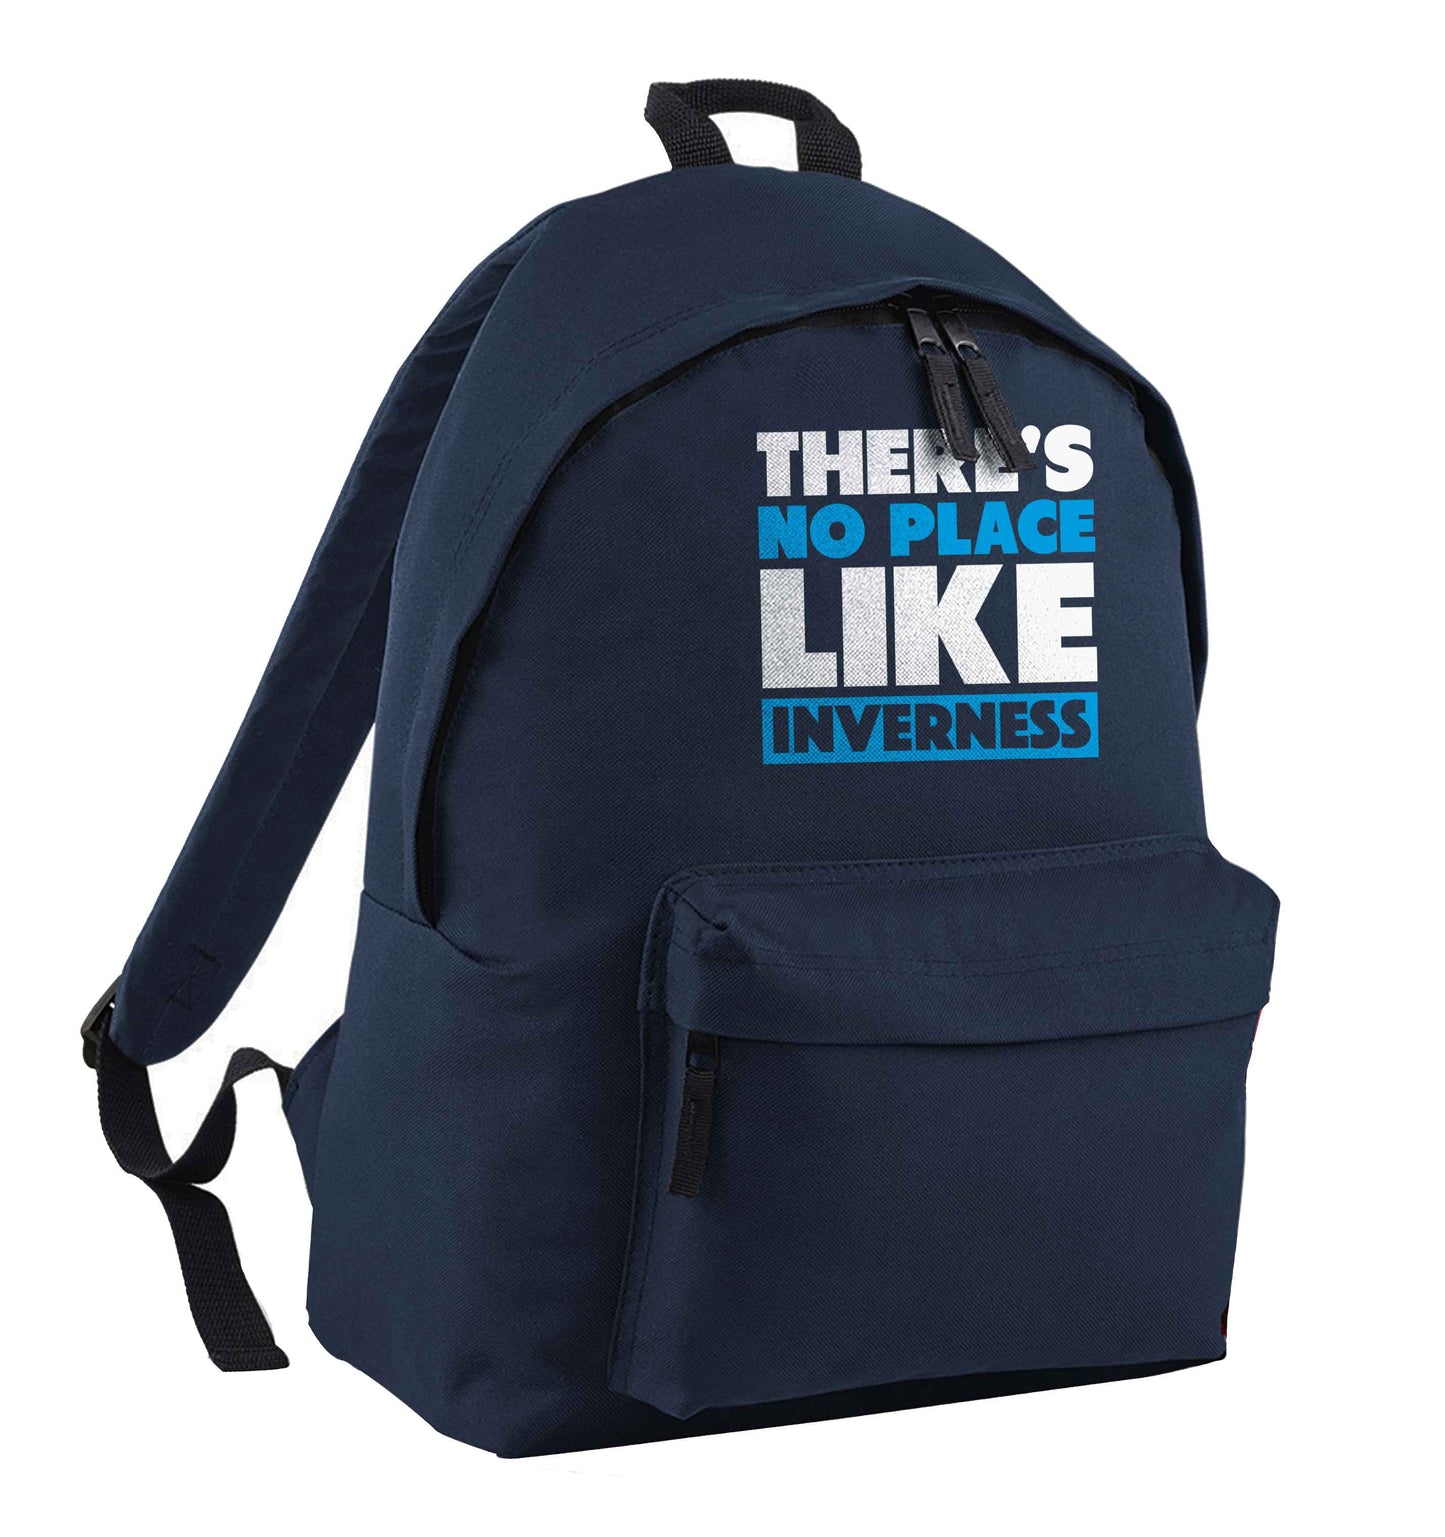 There's no place like Inverness navy adults backpack